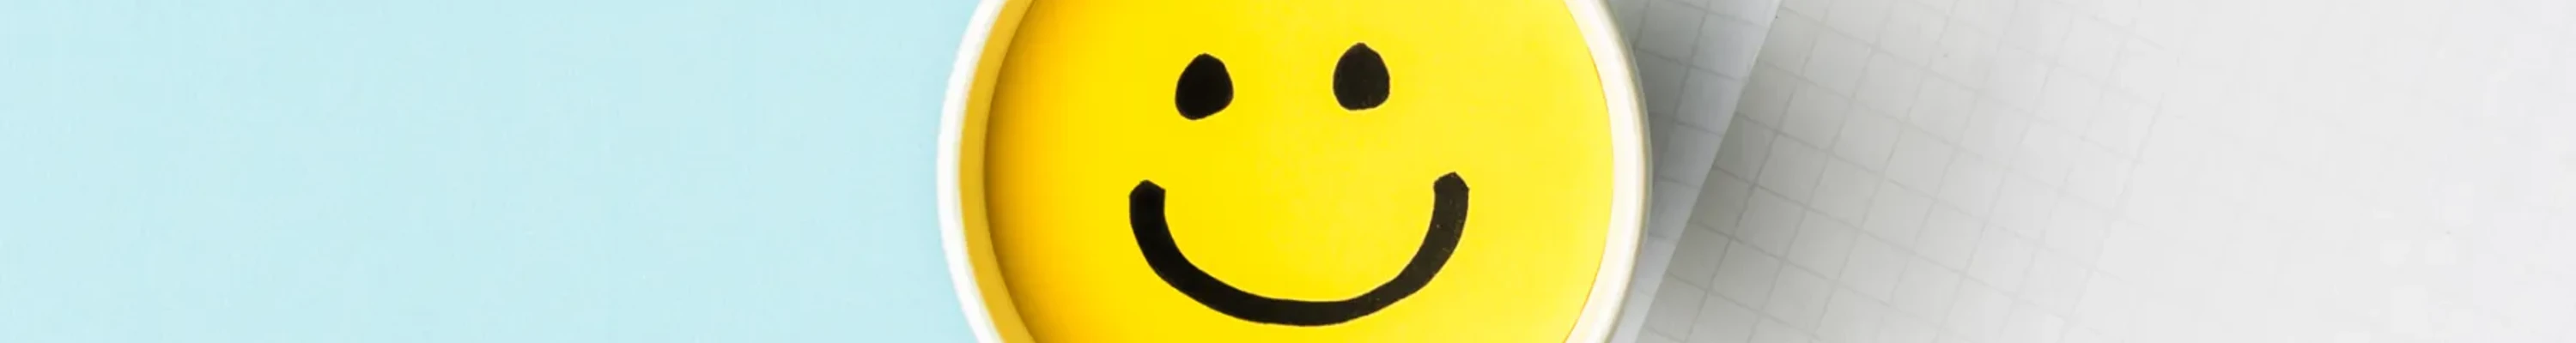 Smiley face with forms